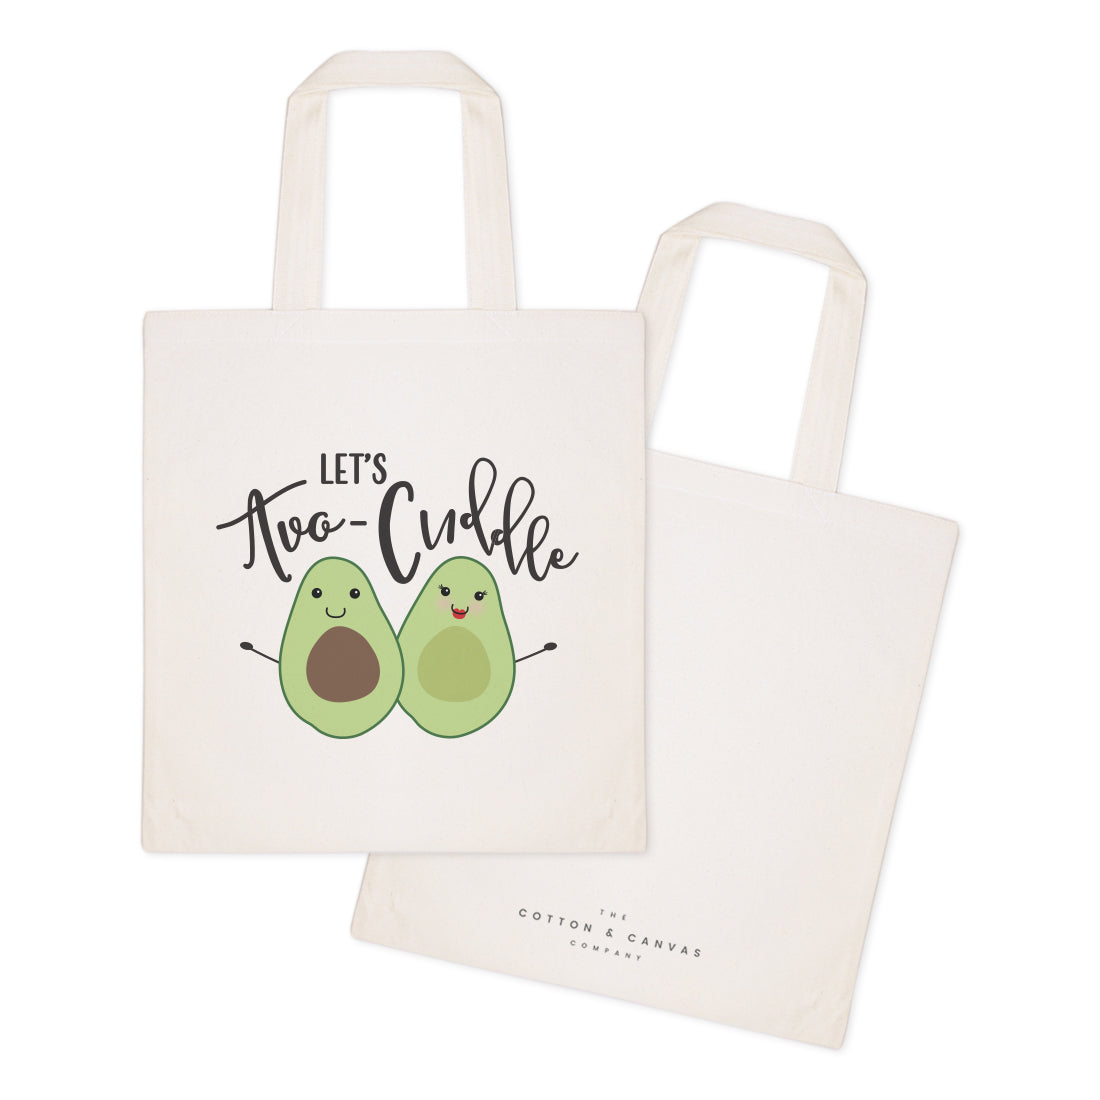 Let's Avo-cuddle Cotton Canvas Tote Bag by The Cotton & Canvas Co.